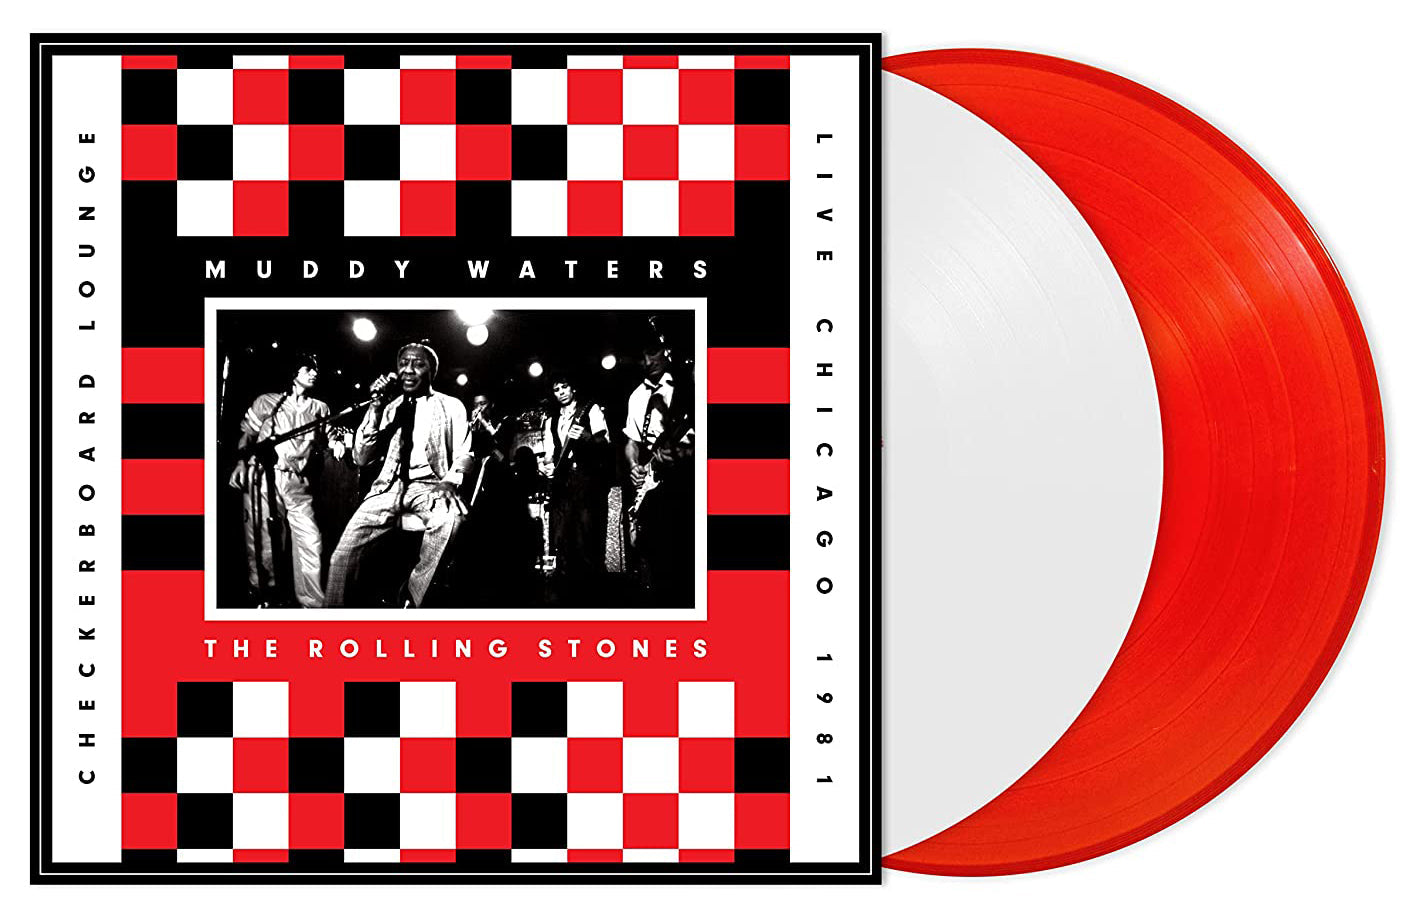 The Rolling Stones & Muddy Waters Live Chicago 1981 White/Red Vinyl LP